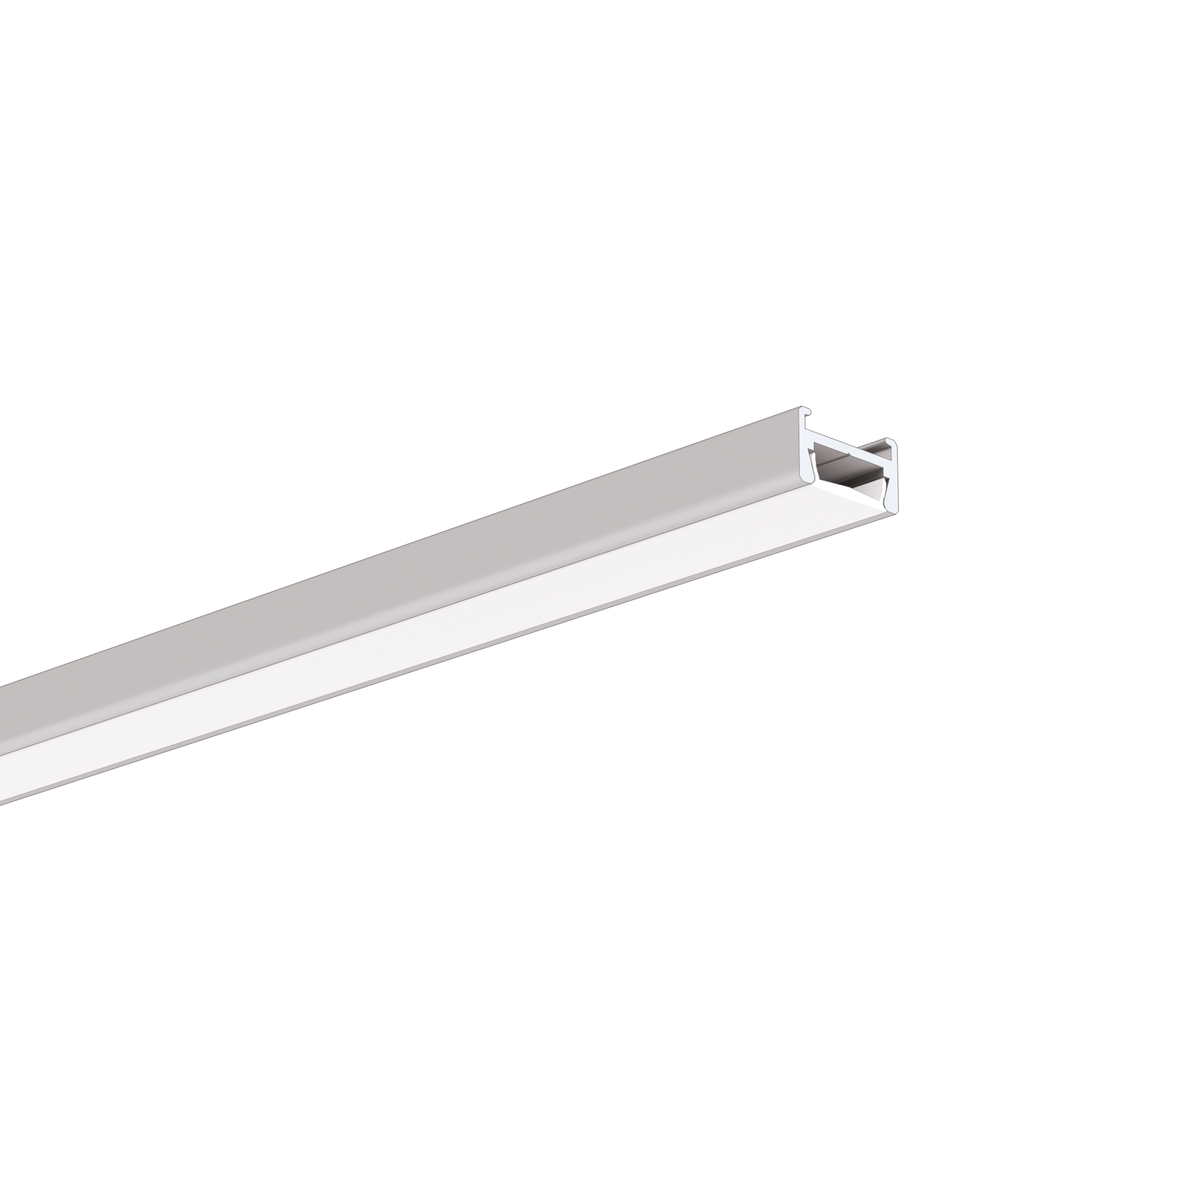 LED extrusions (1)